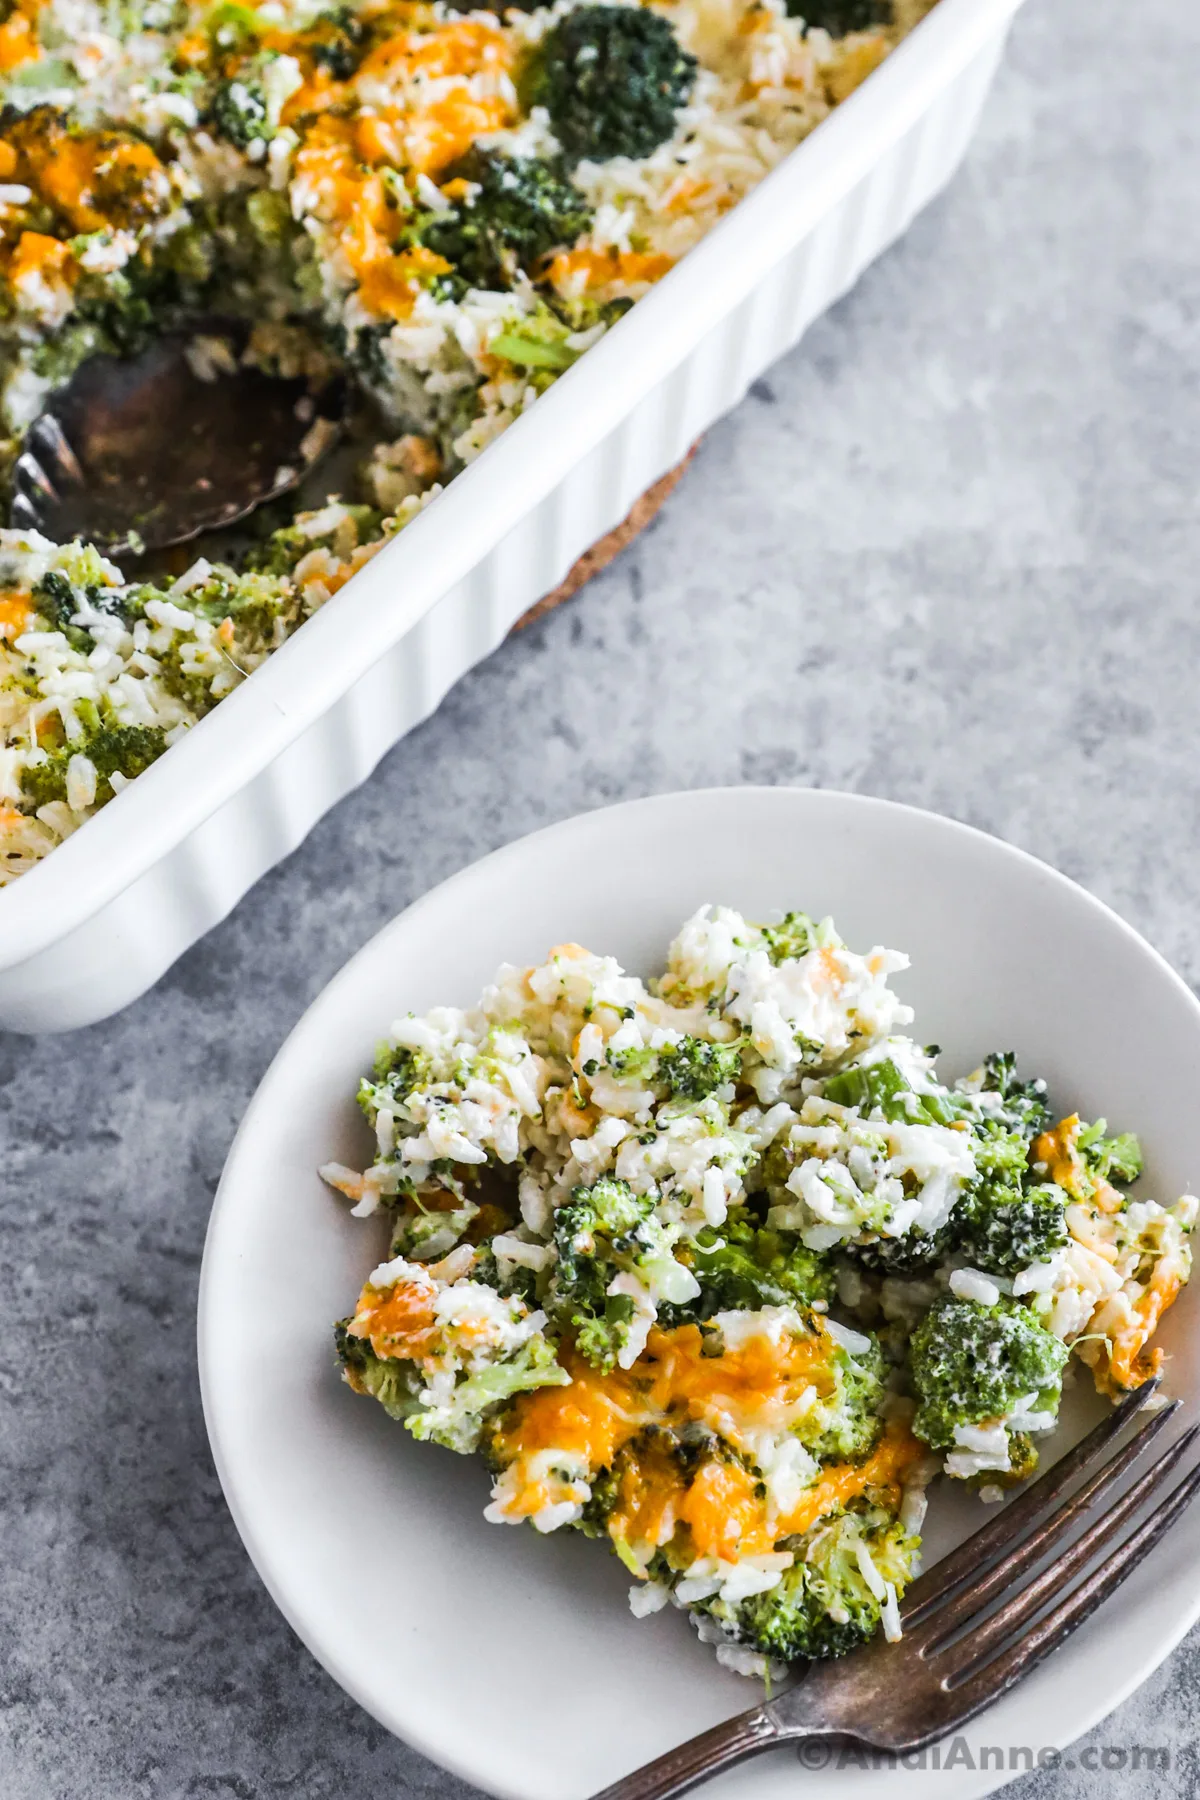 A plate of broccoli cheese rice casserole recipe with a fork, and casserole dish behind it.